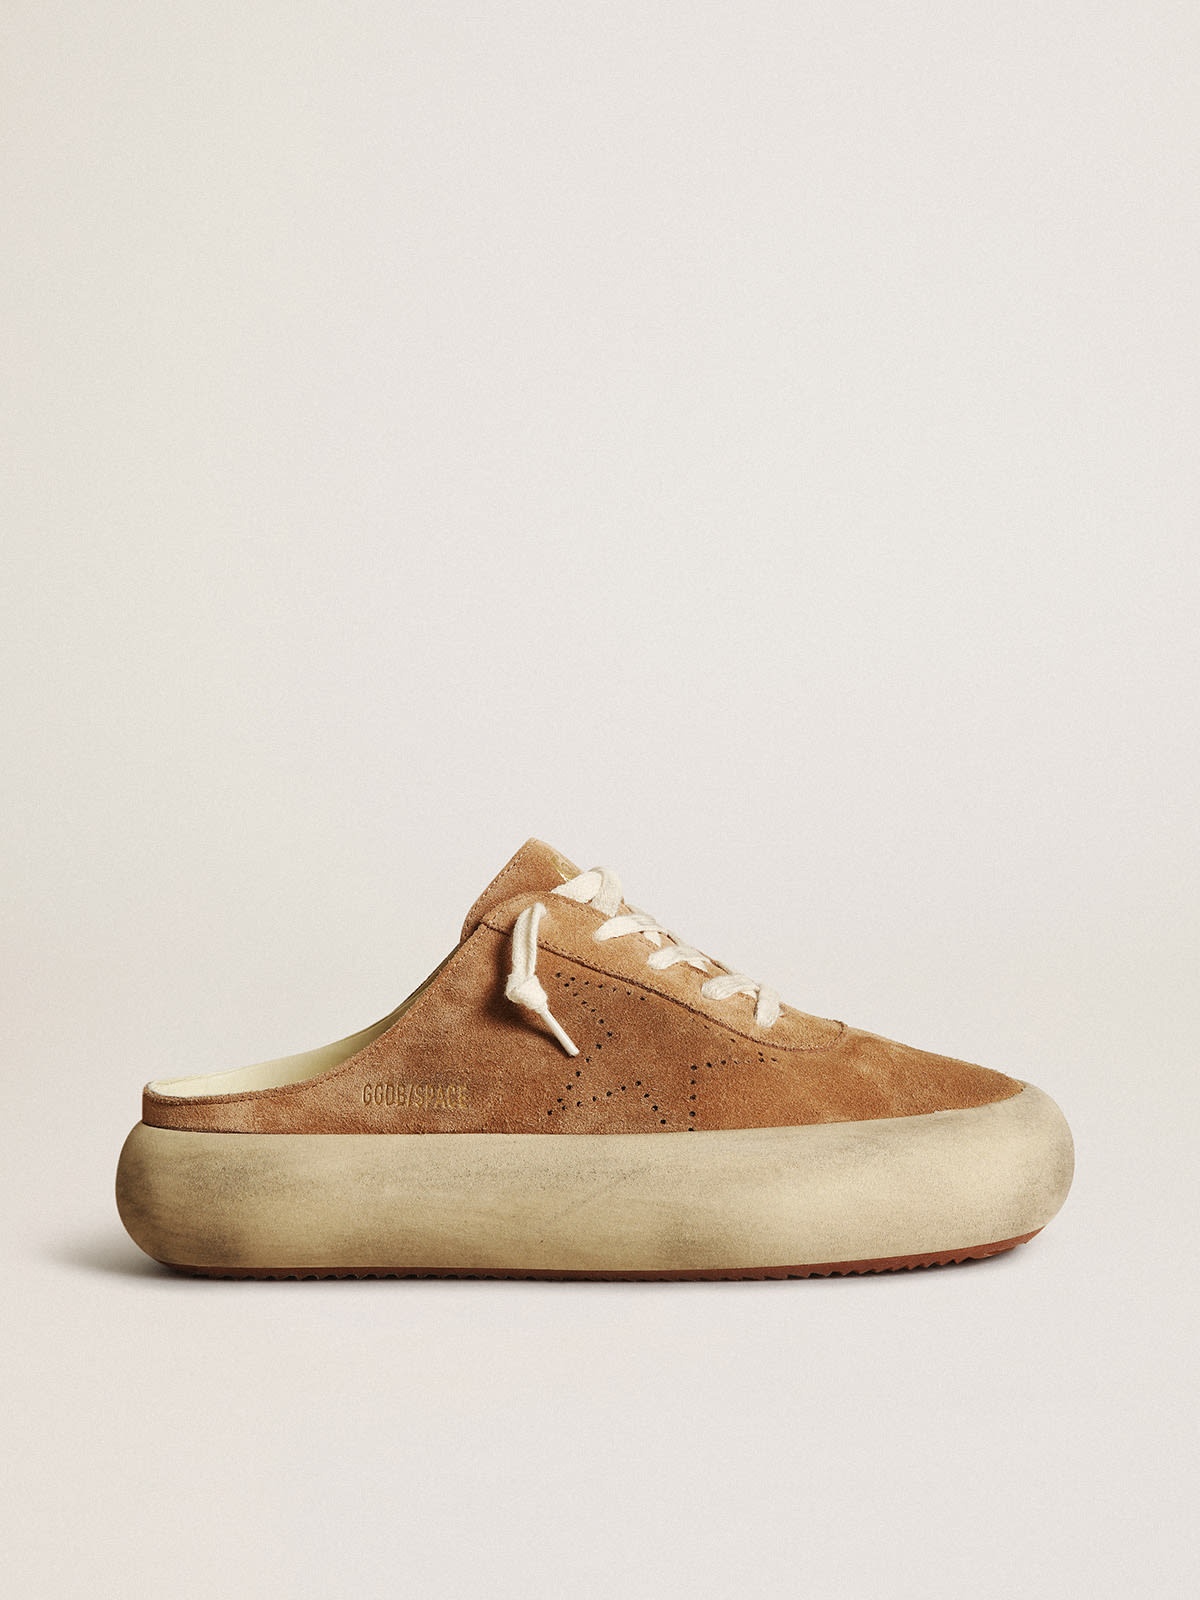 Women's Space-Star Sabots in tobacco-colored suede with perforated star - 1